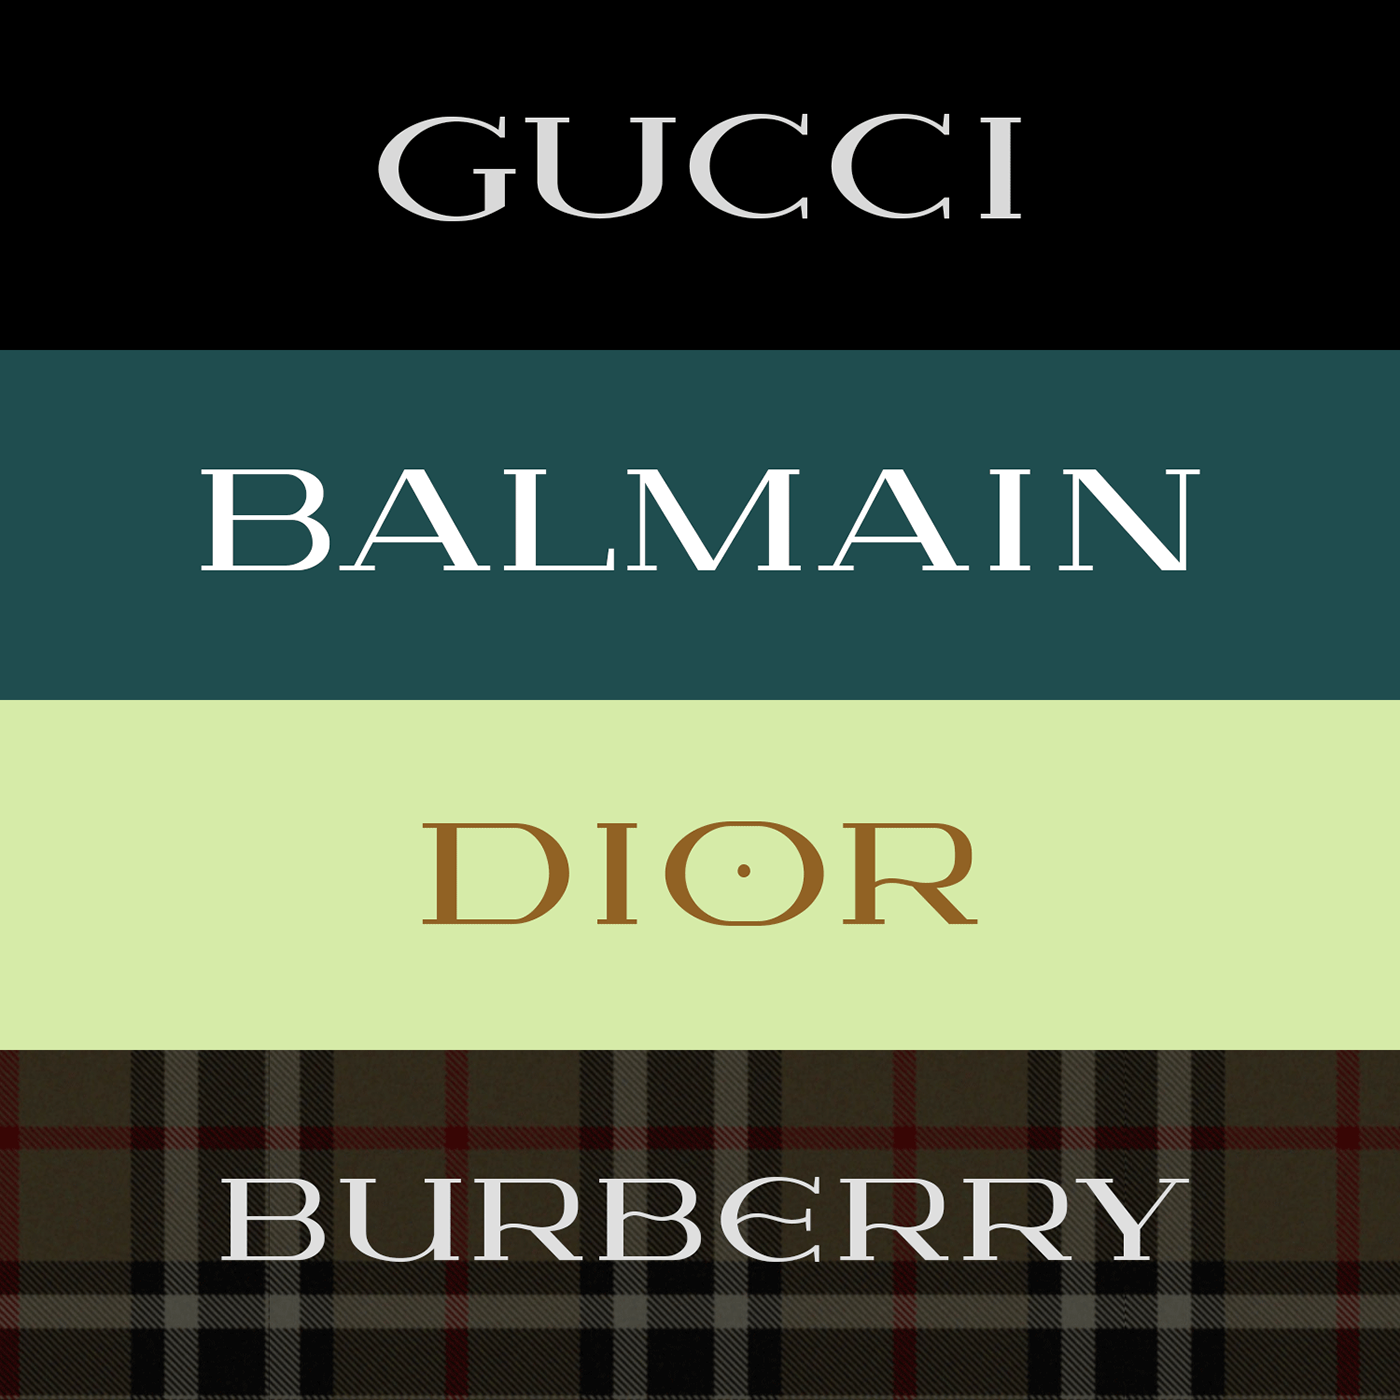 Free font free typeface expensive looking classic font luxurious logo font for logos